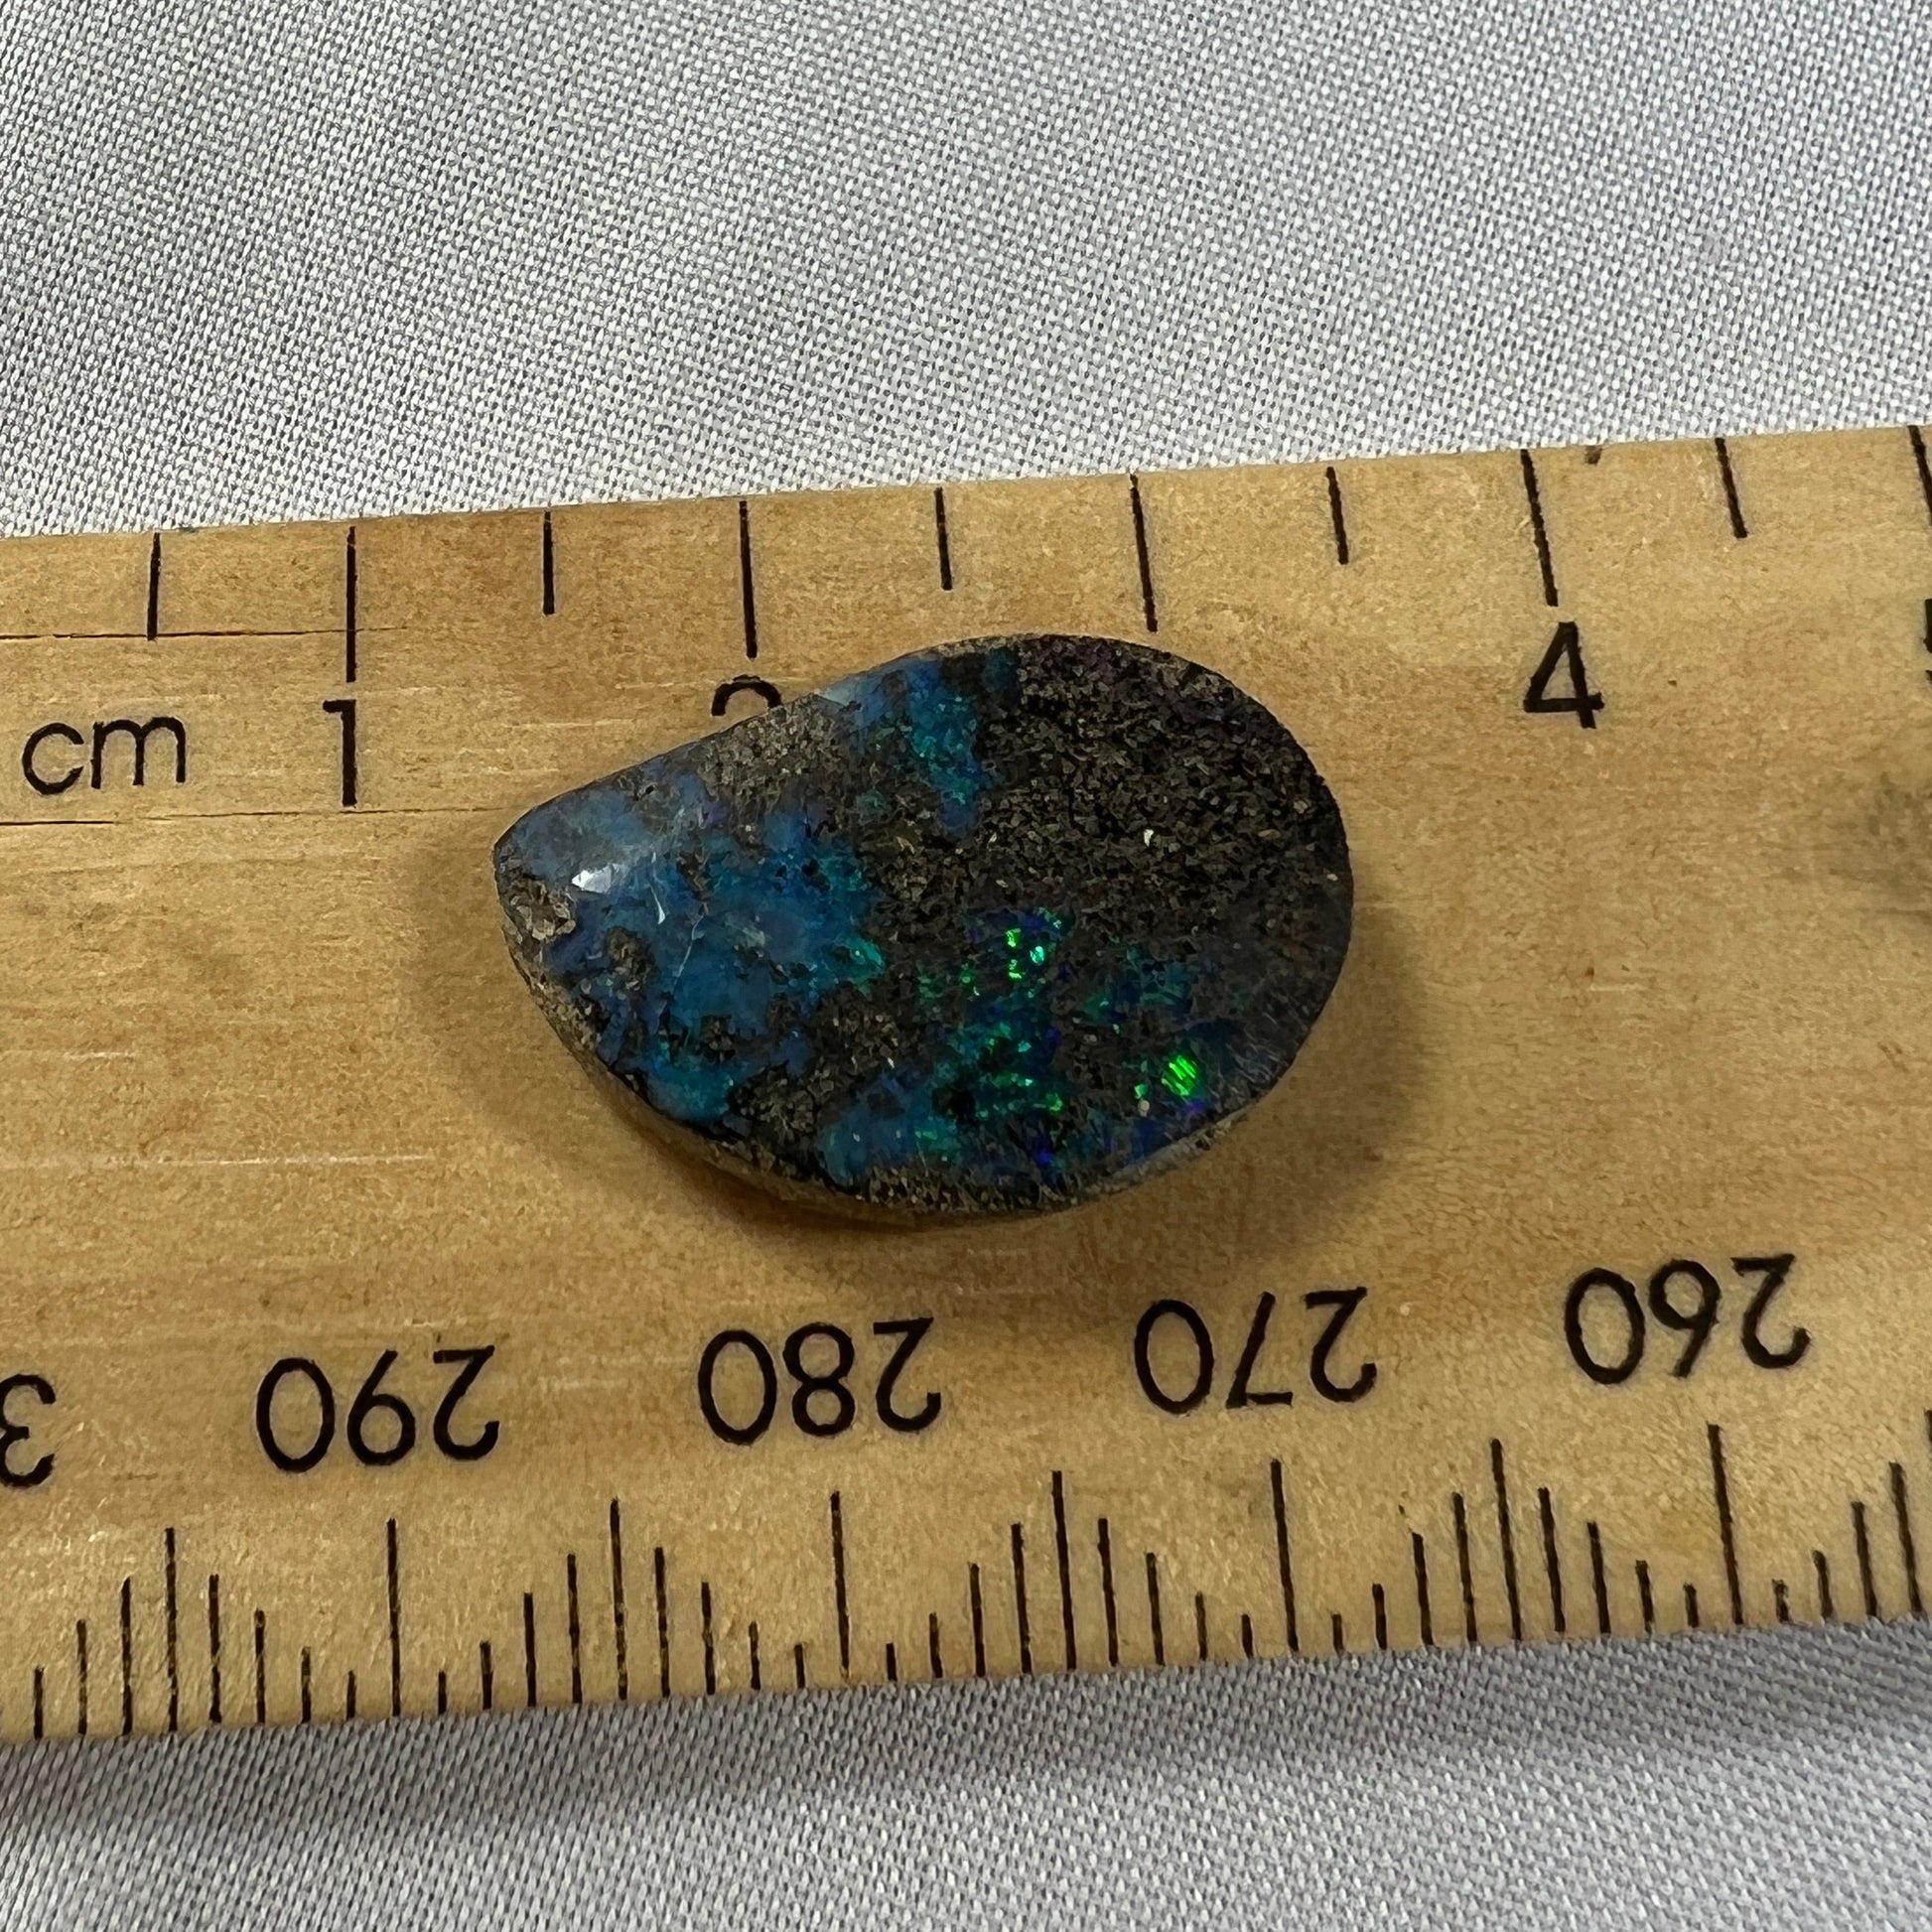 Winton boulder opal with lots of sparkle. Pretty blues and greens.